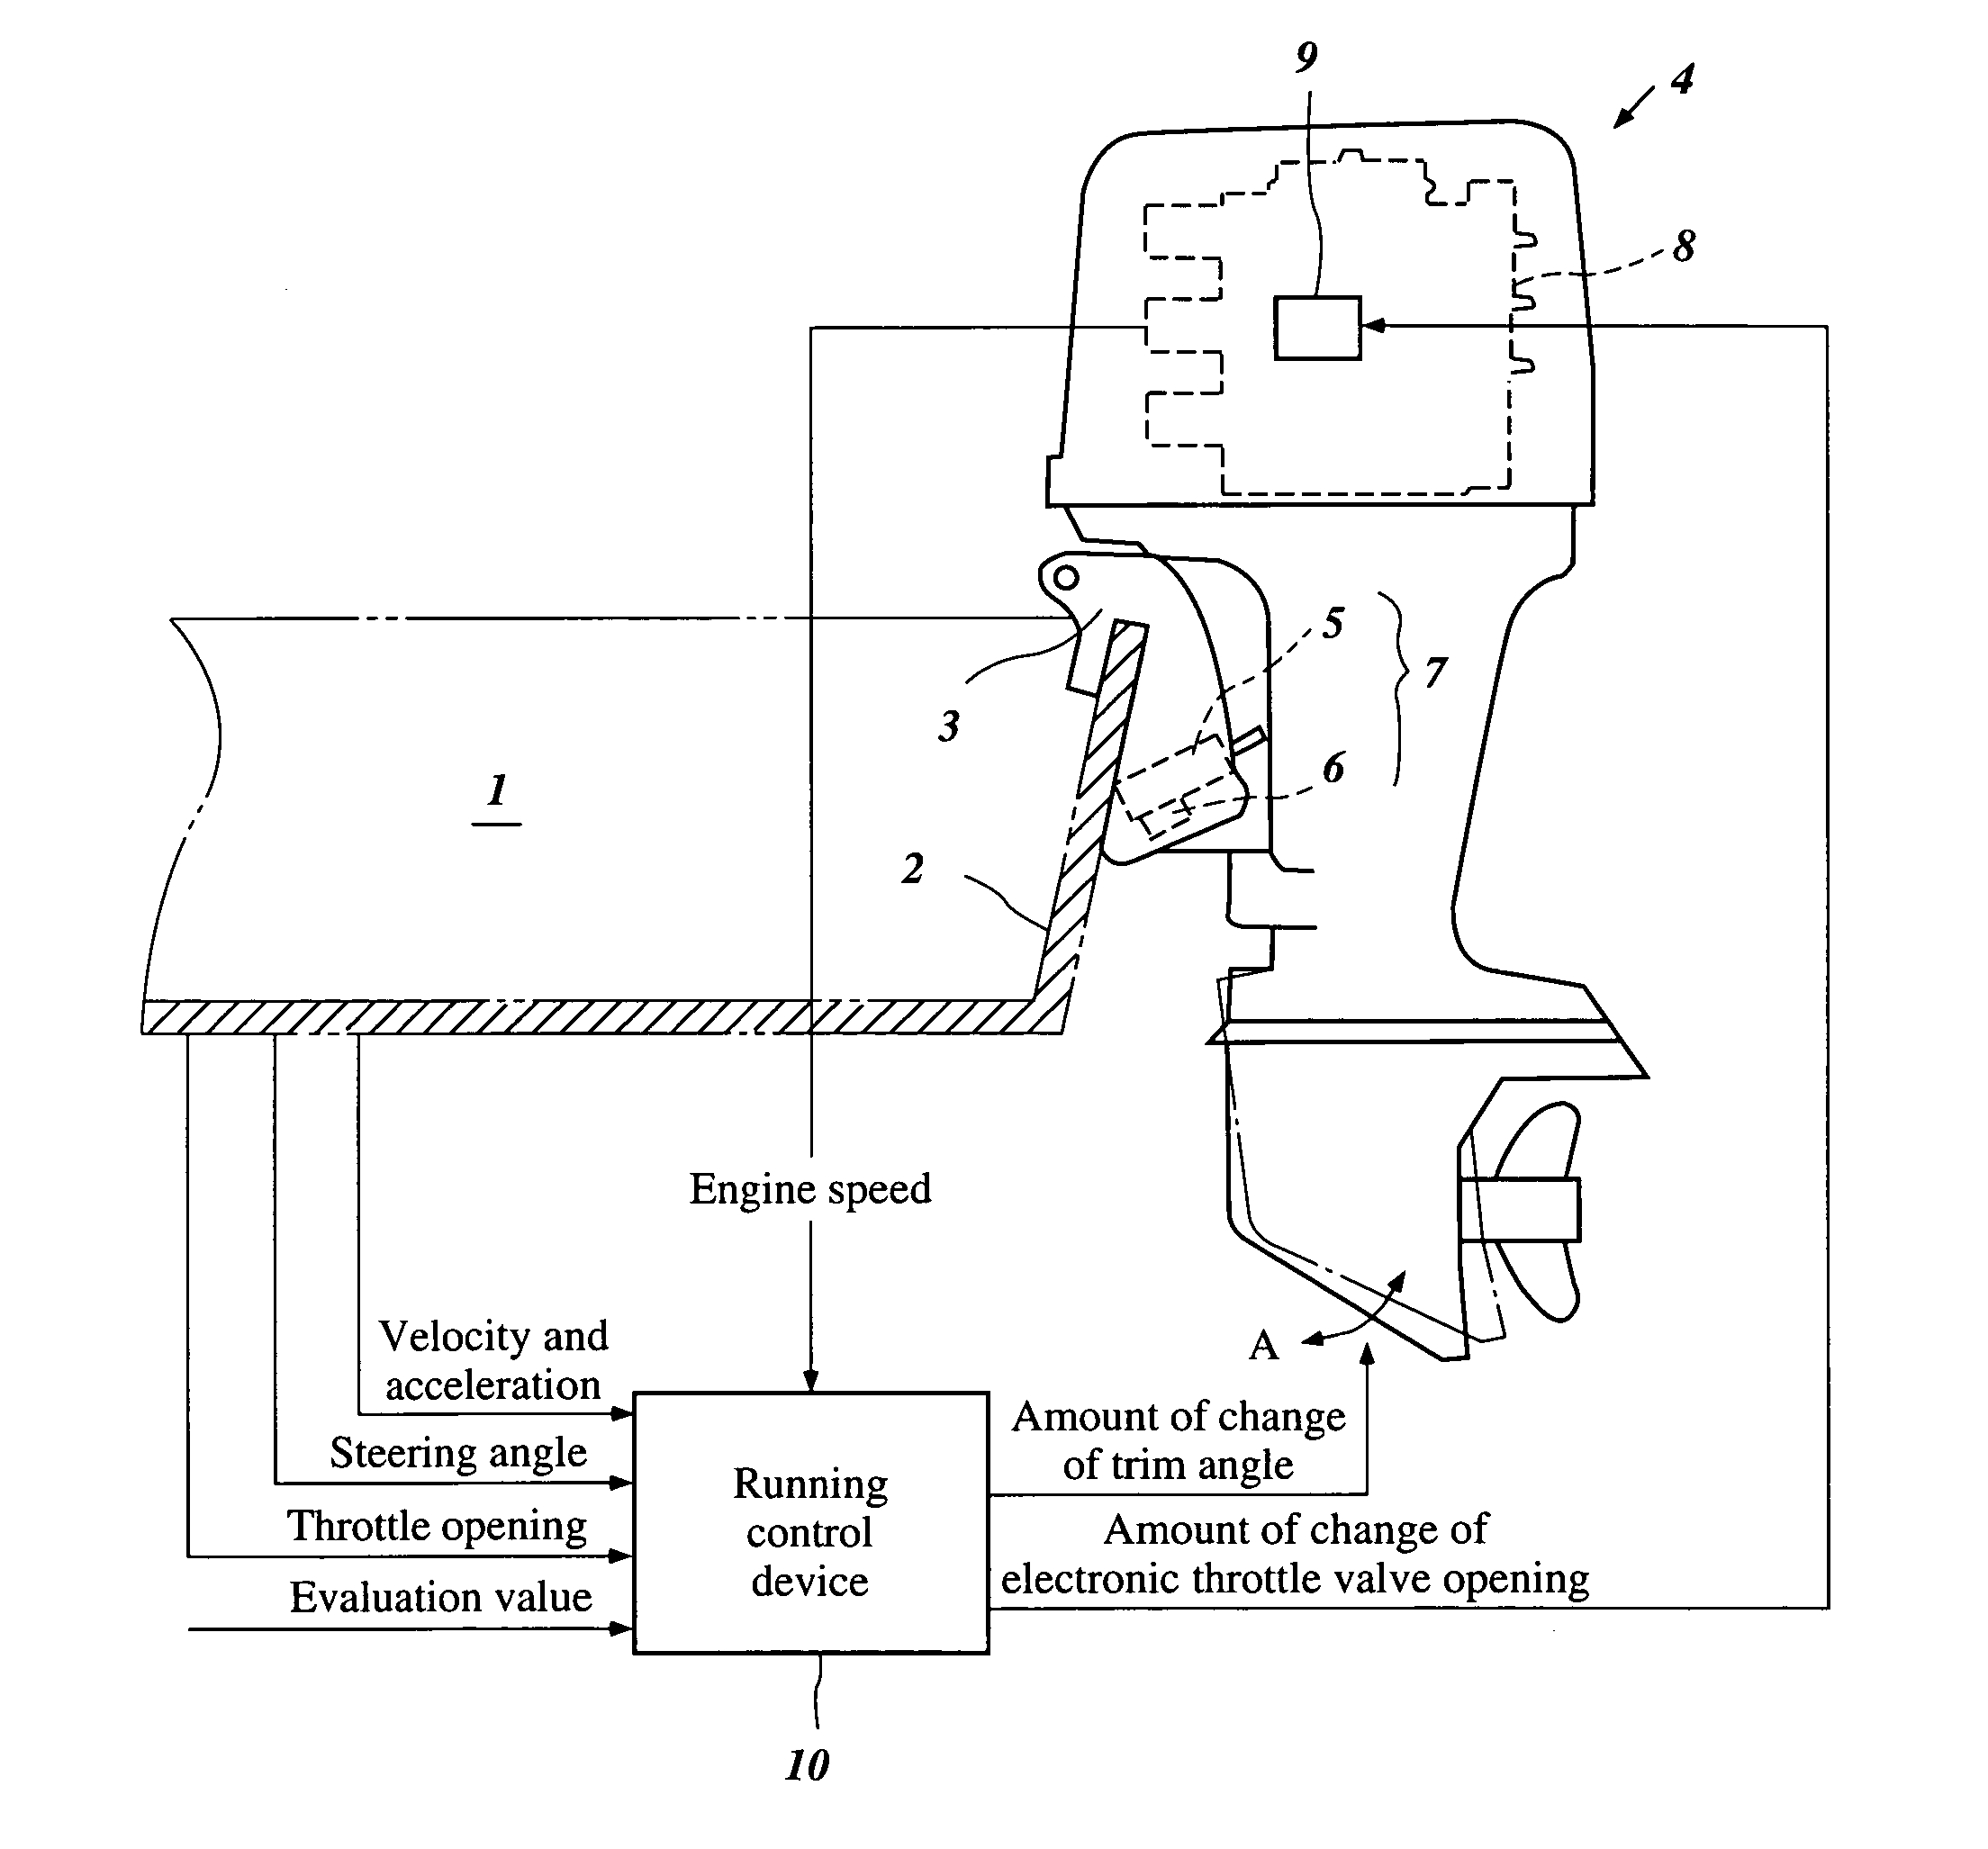 Running control device